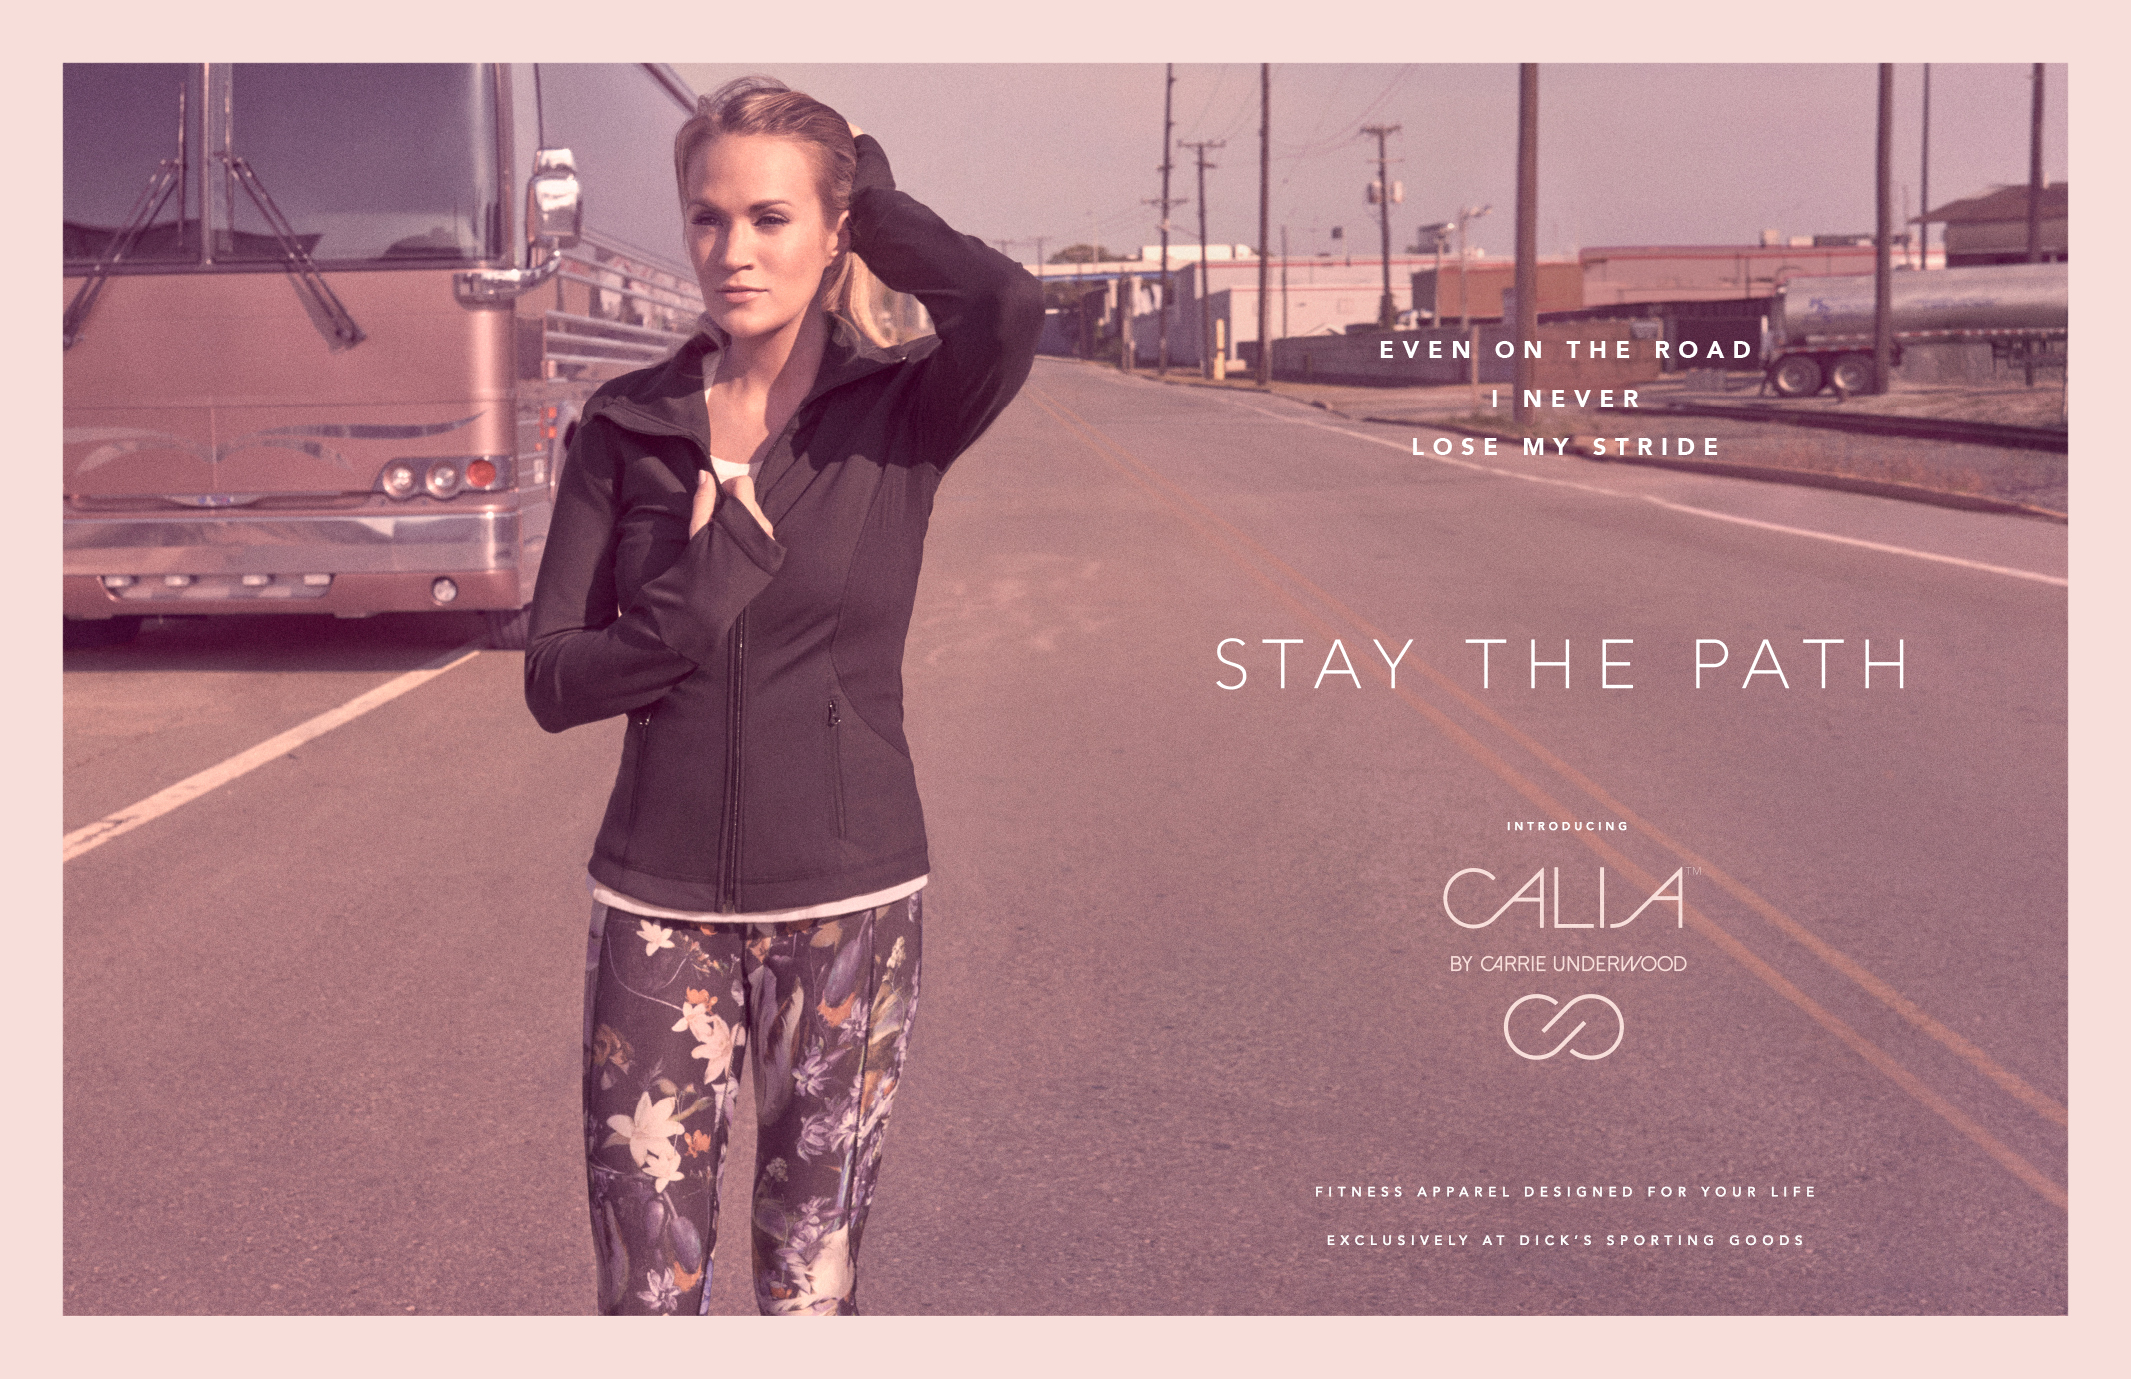 CALIA BY CARRIE UNDERWOOD brand, launch, advertising - WNW